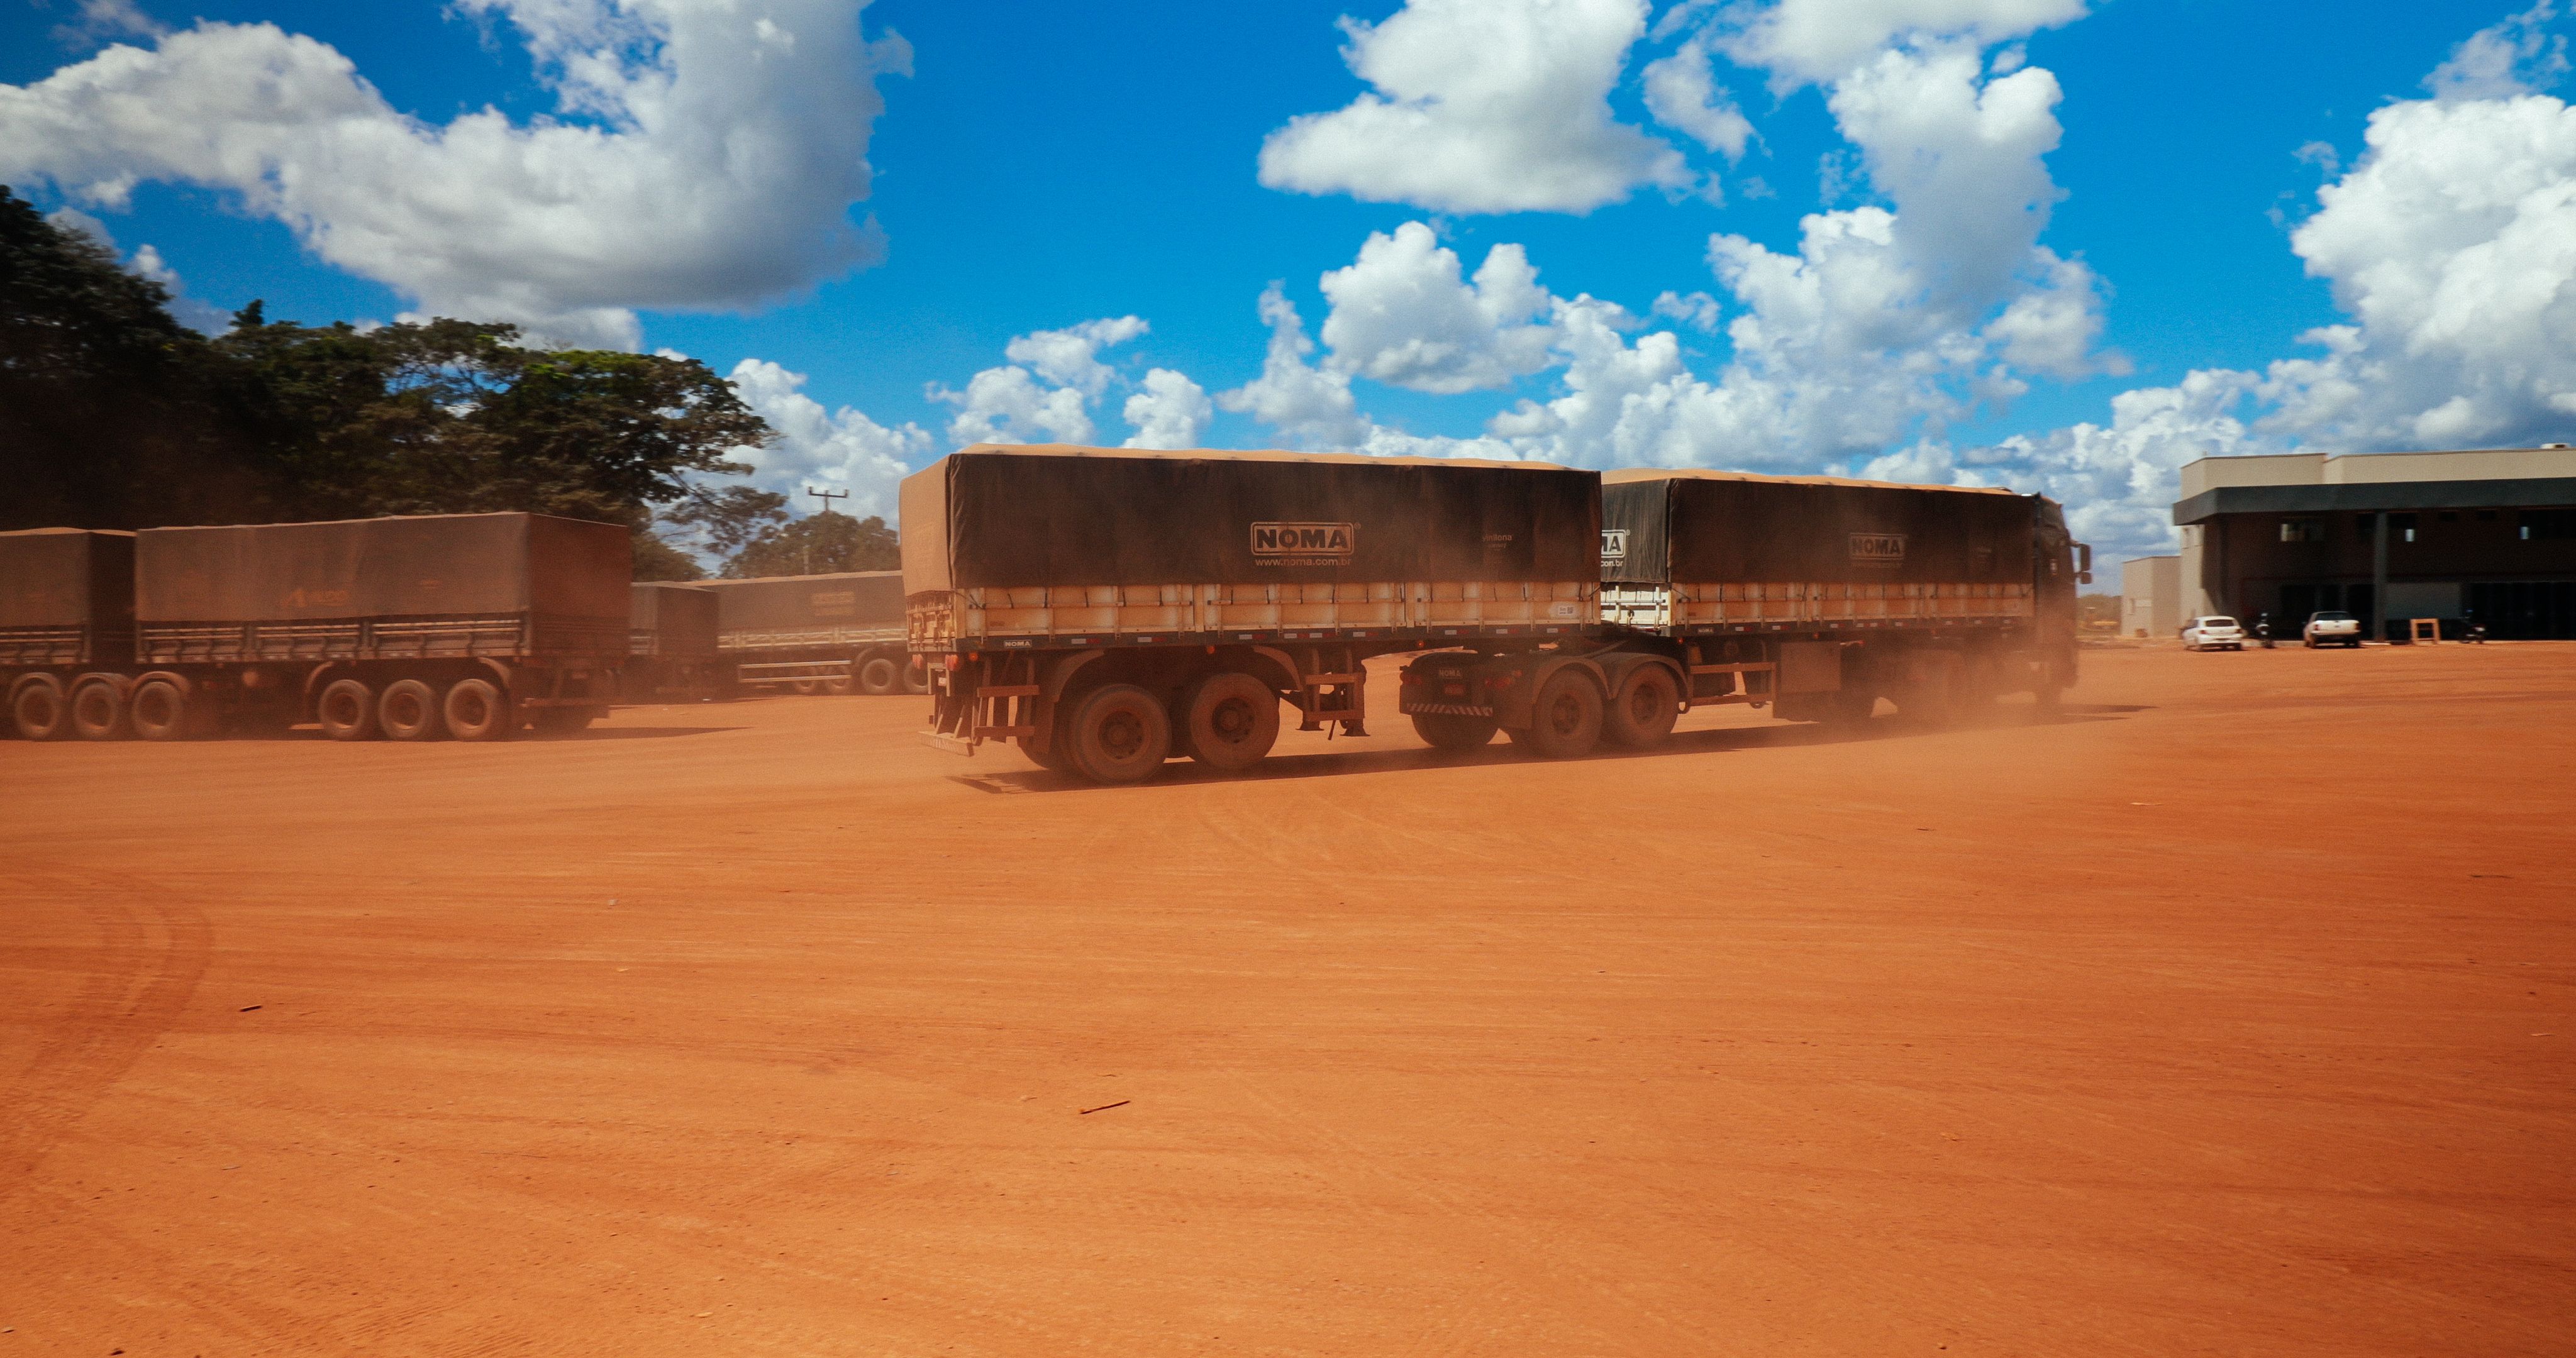 Soy trucks kick up dust as they approach a warehouse in Mato Grosso. Image by Sam Eaton. Brazil, 2018.